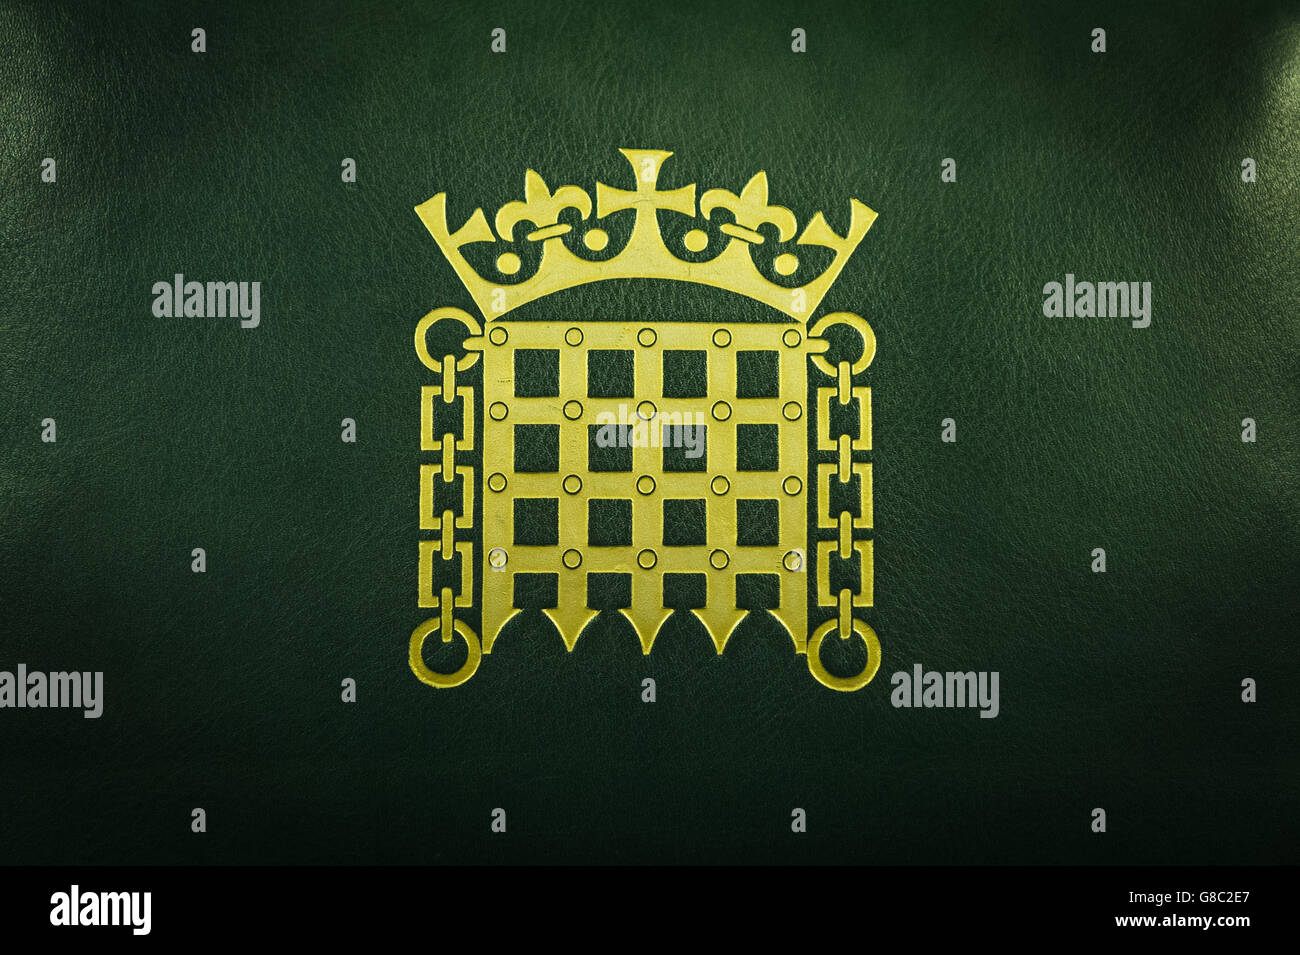 A Crowned Portcullis logo which is the official emblem of the House of Commons on a leather chair. Stock Photo